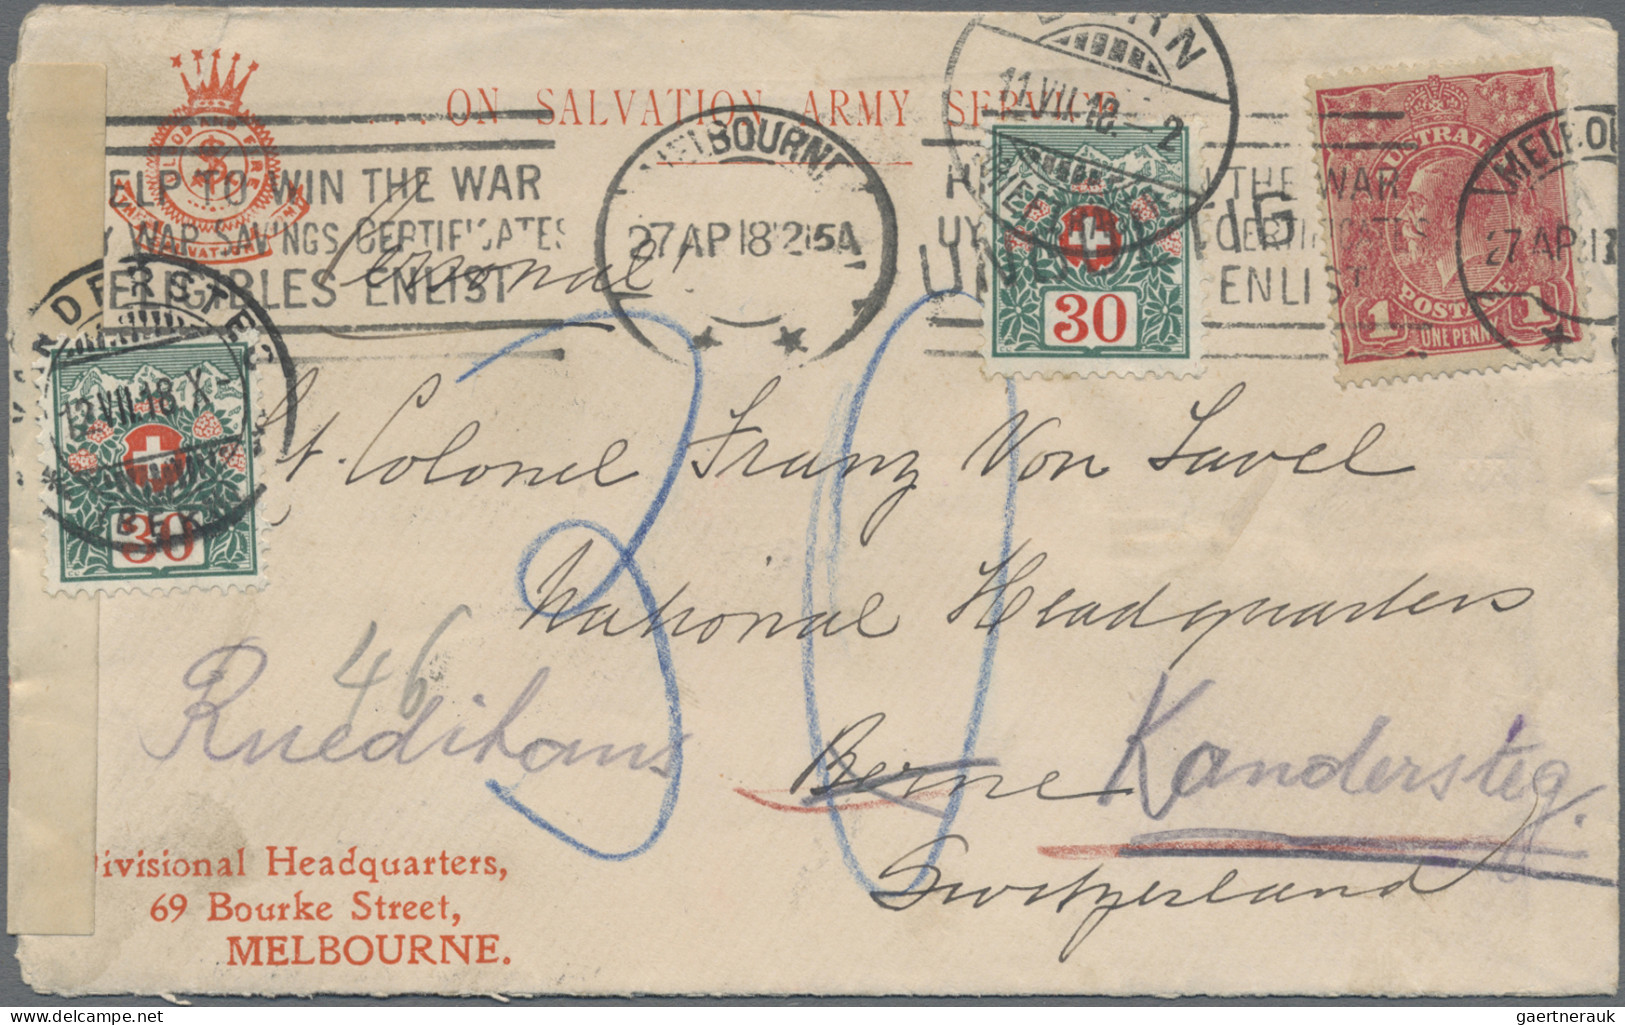 Australia: 1914/1919 ca., 1d red KGV (ACSC 71 & 72), very interesting collection